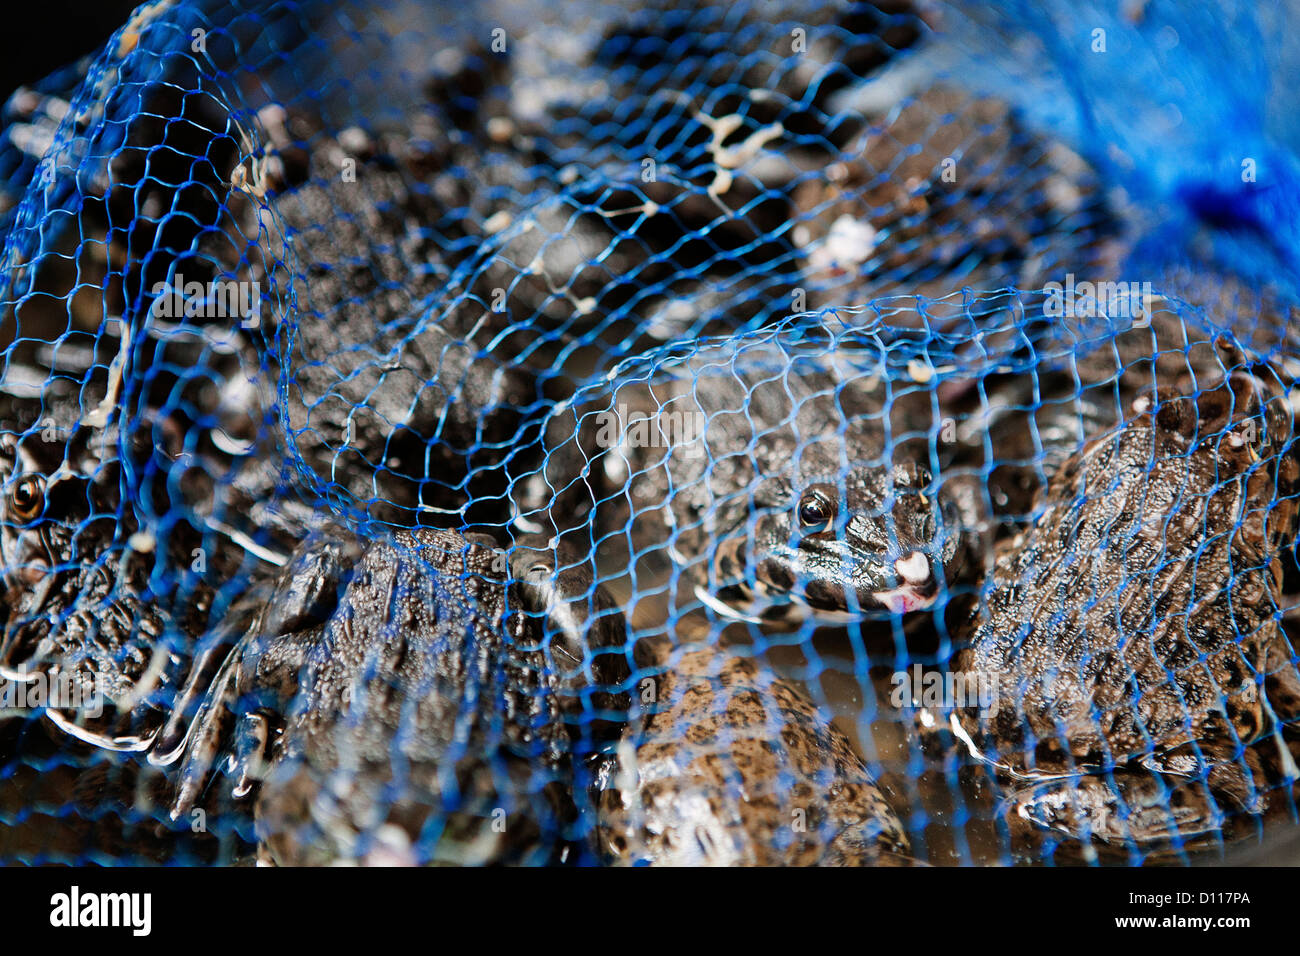 Frogs in a net for food at Guilin, China Stock Photo